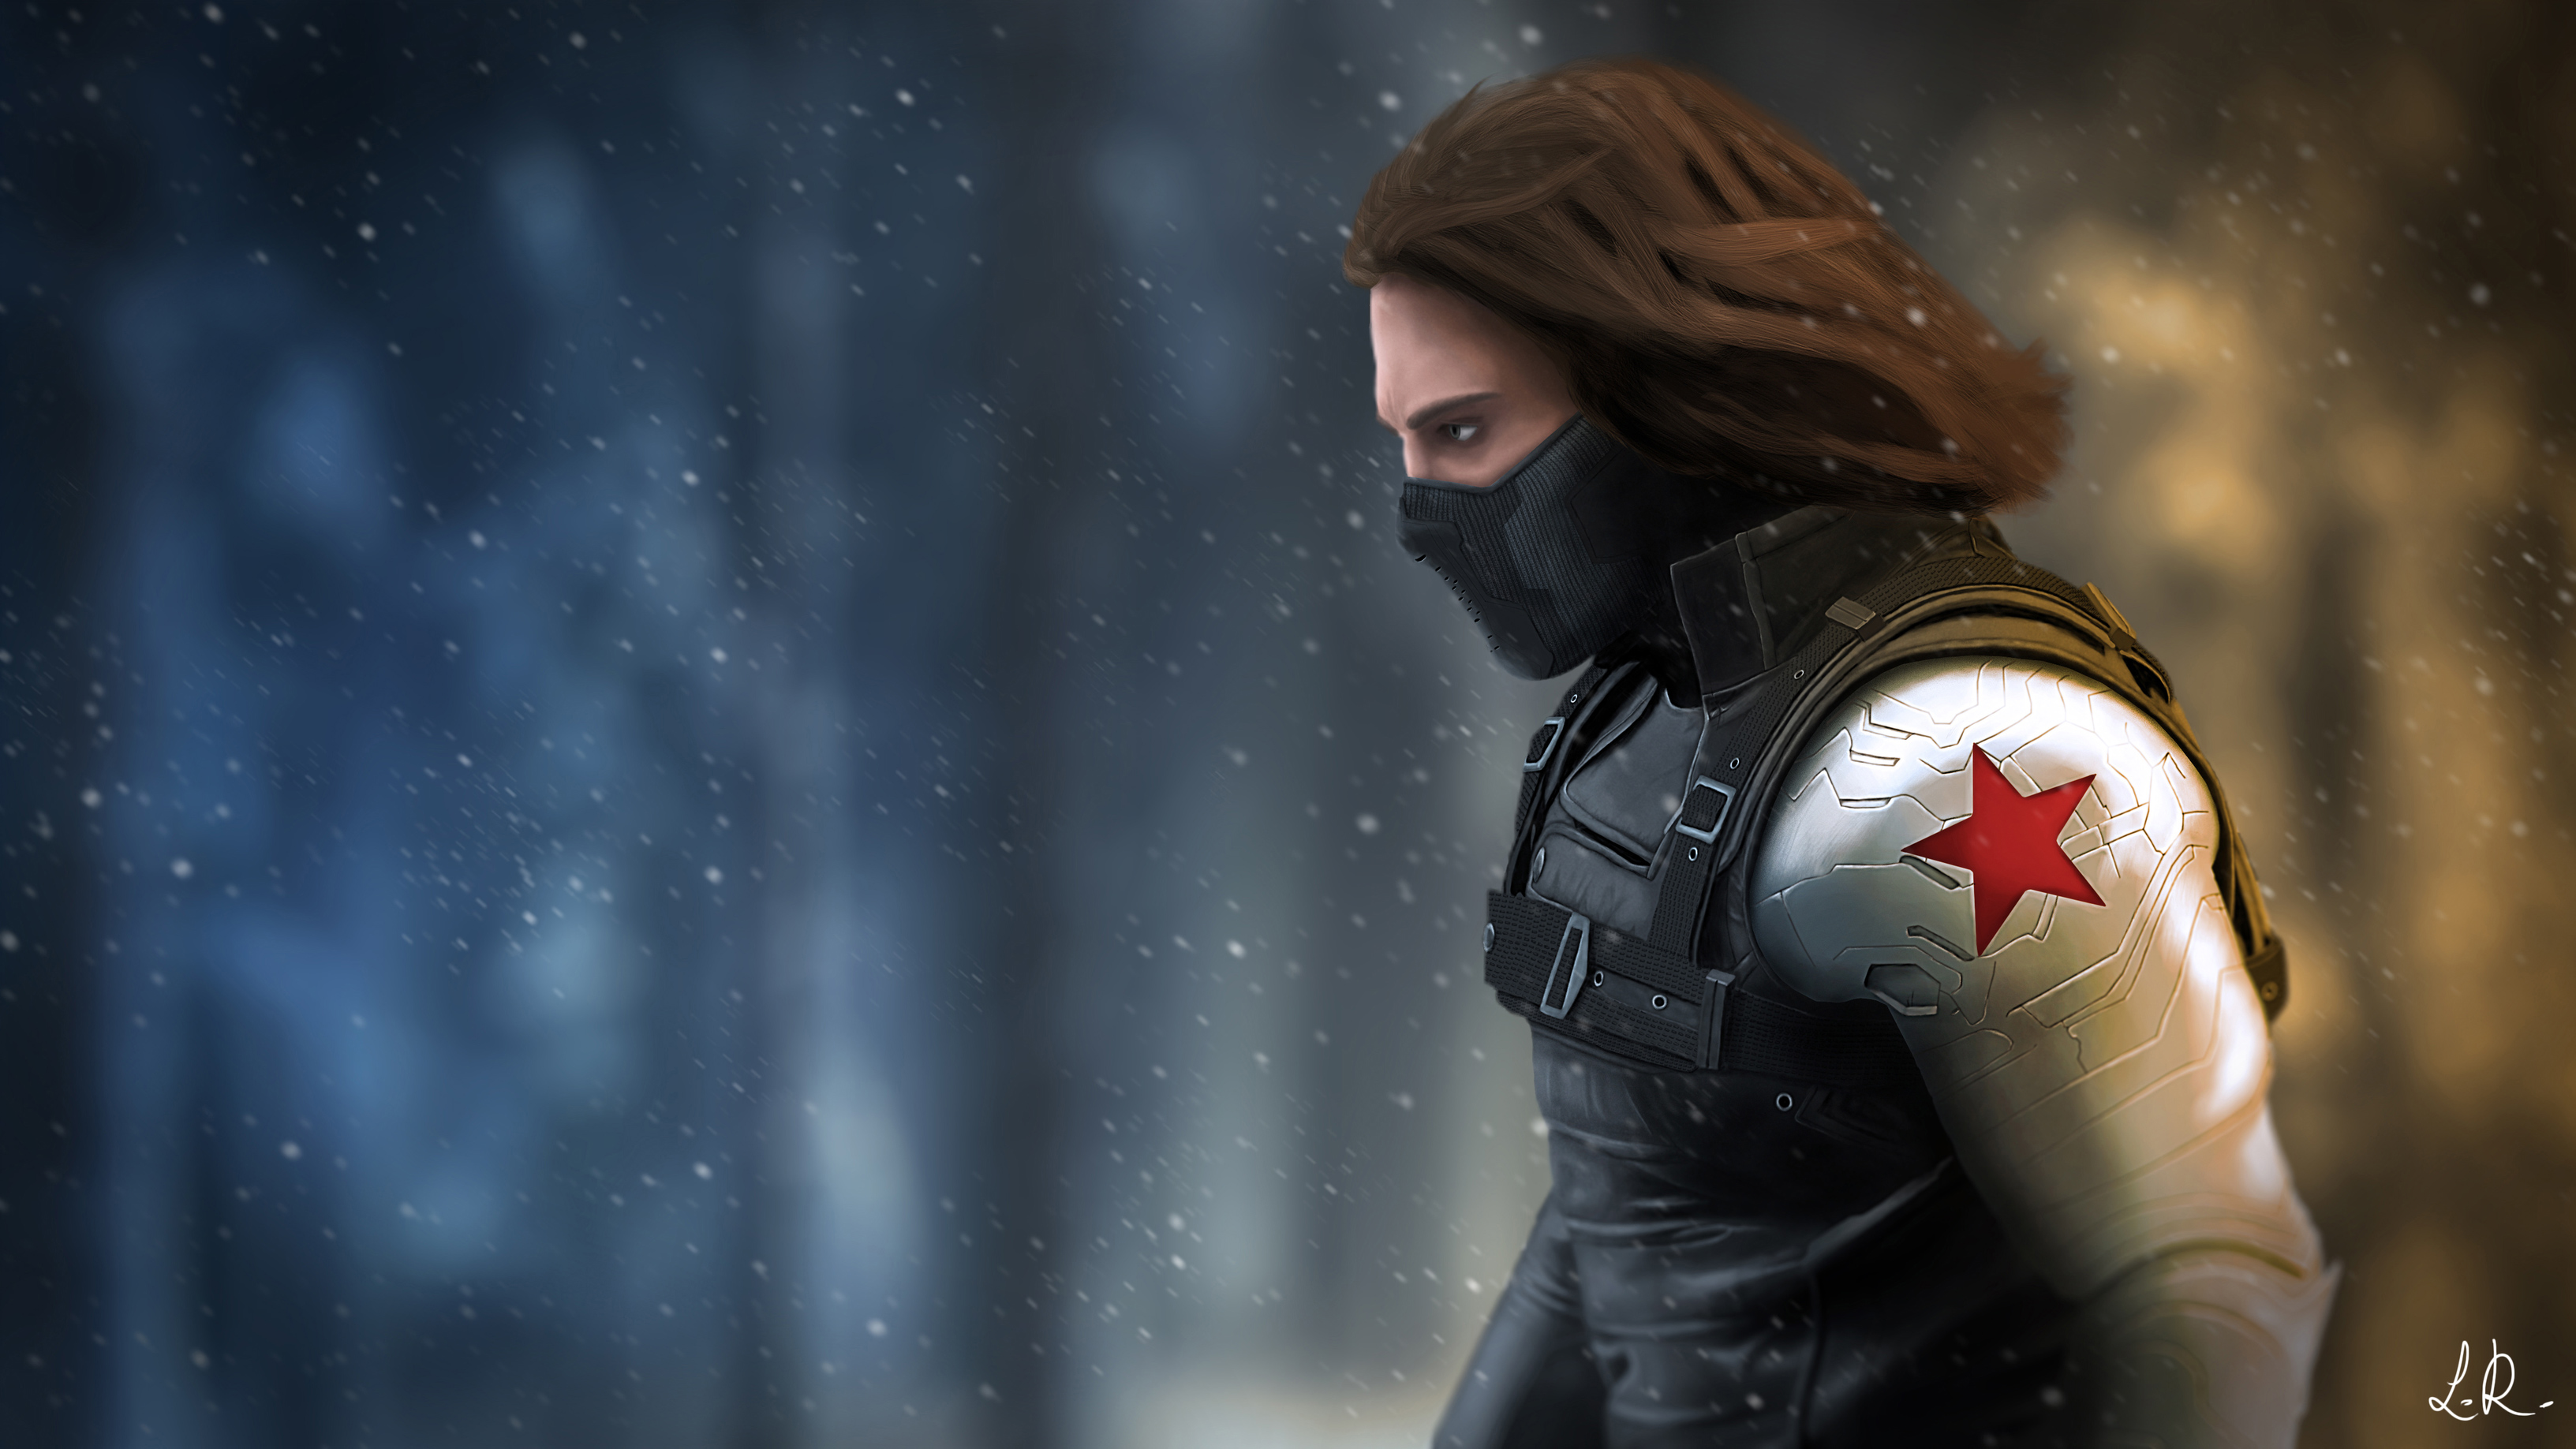 Winter Soldier Wallpaper Posted By Ethan Mercado